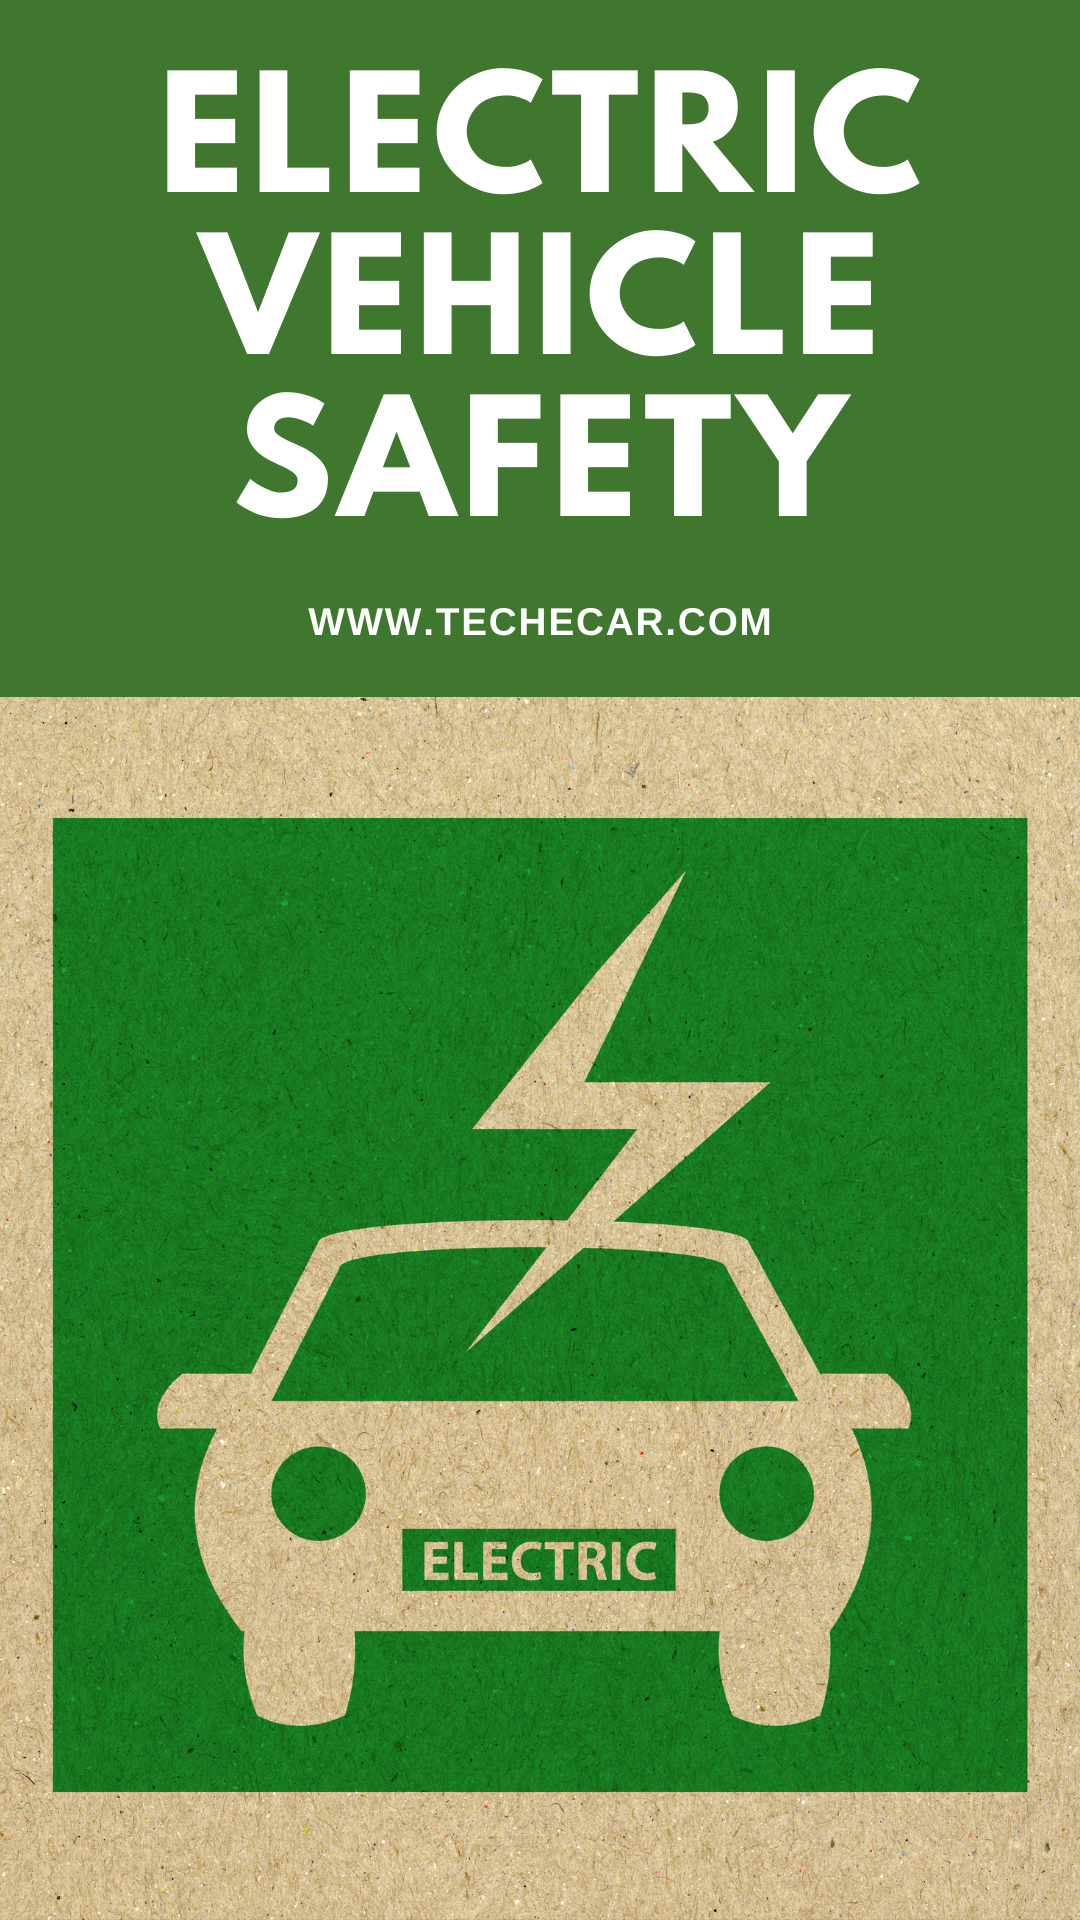 Electric Vehicle Safety